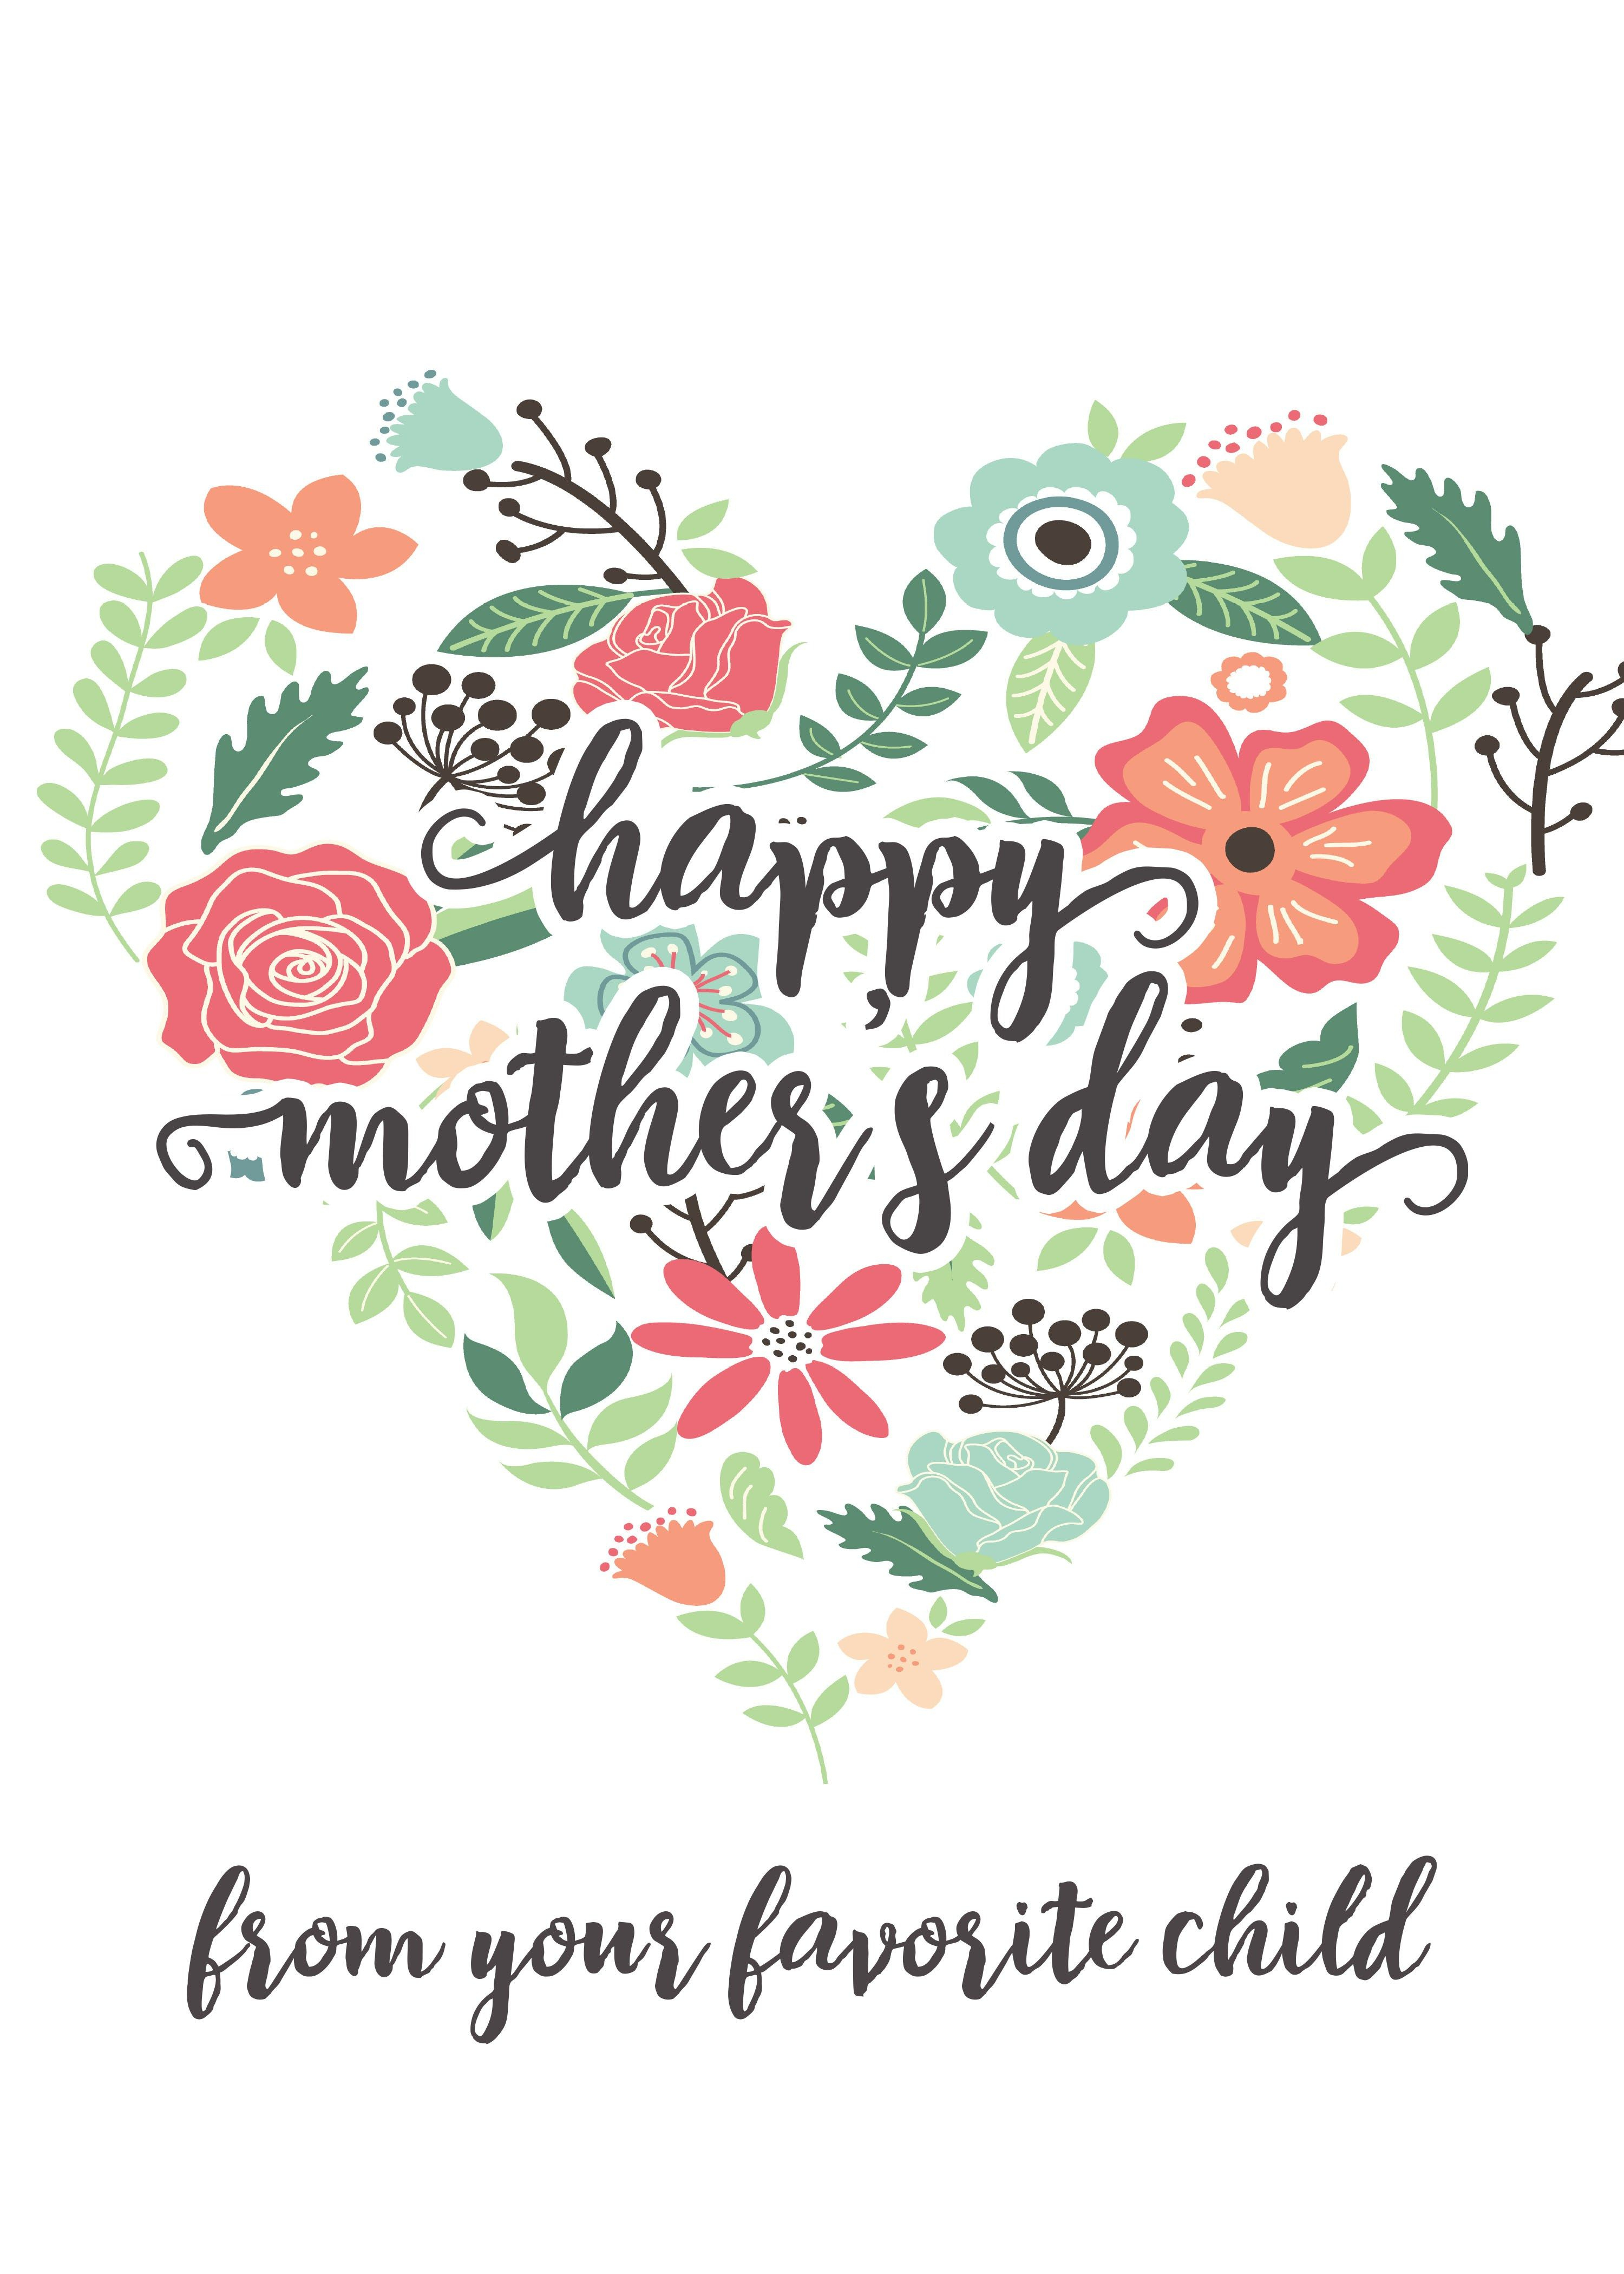 Happy Mothers Day Messages Free Printable Mothers Day Cards - Free Printable Mothers Day Card From Dog